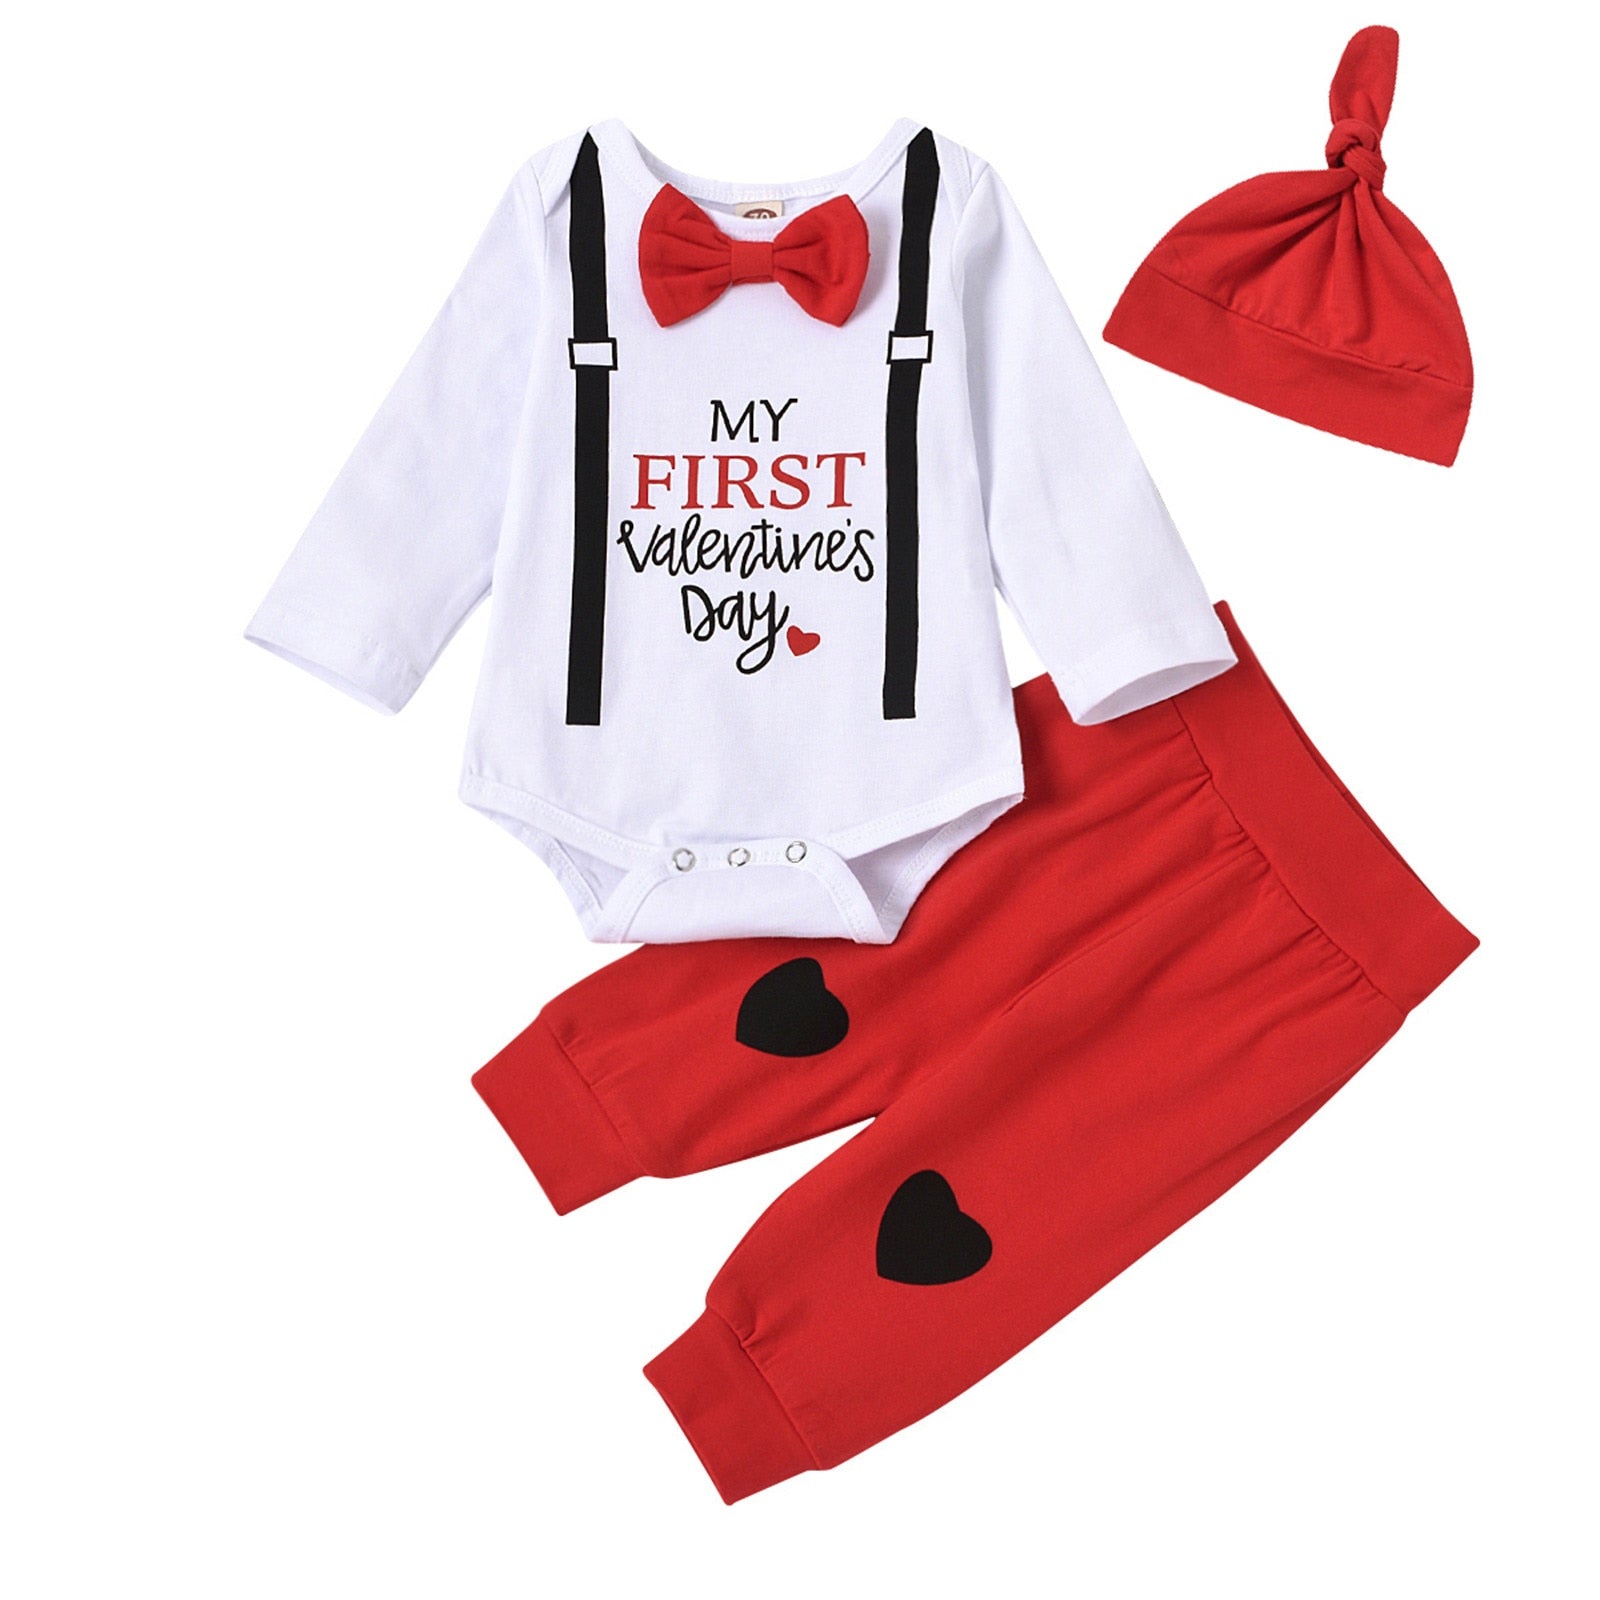 Newborn Baby Clothes My First Valentine Baby/Infant Baby Boys Romper+Pant+Hat 3Pcs Baby Set